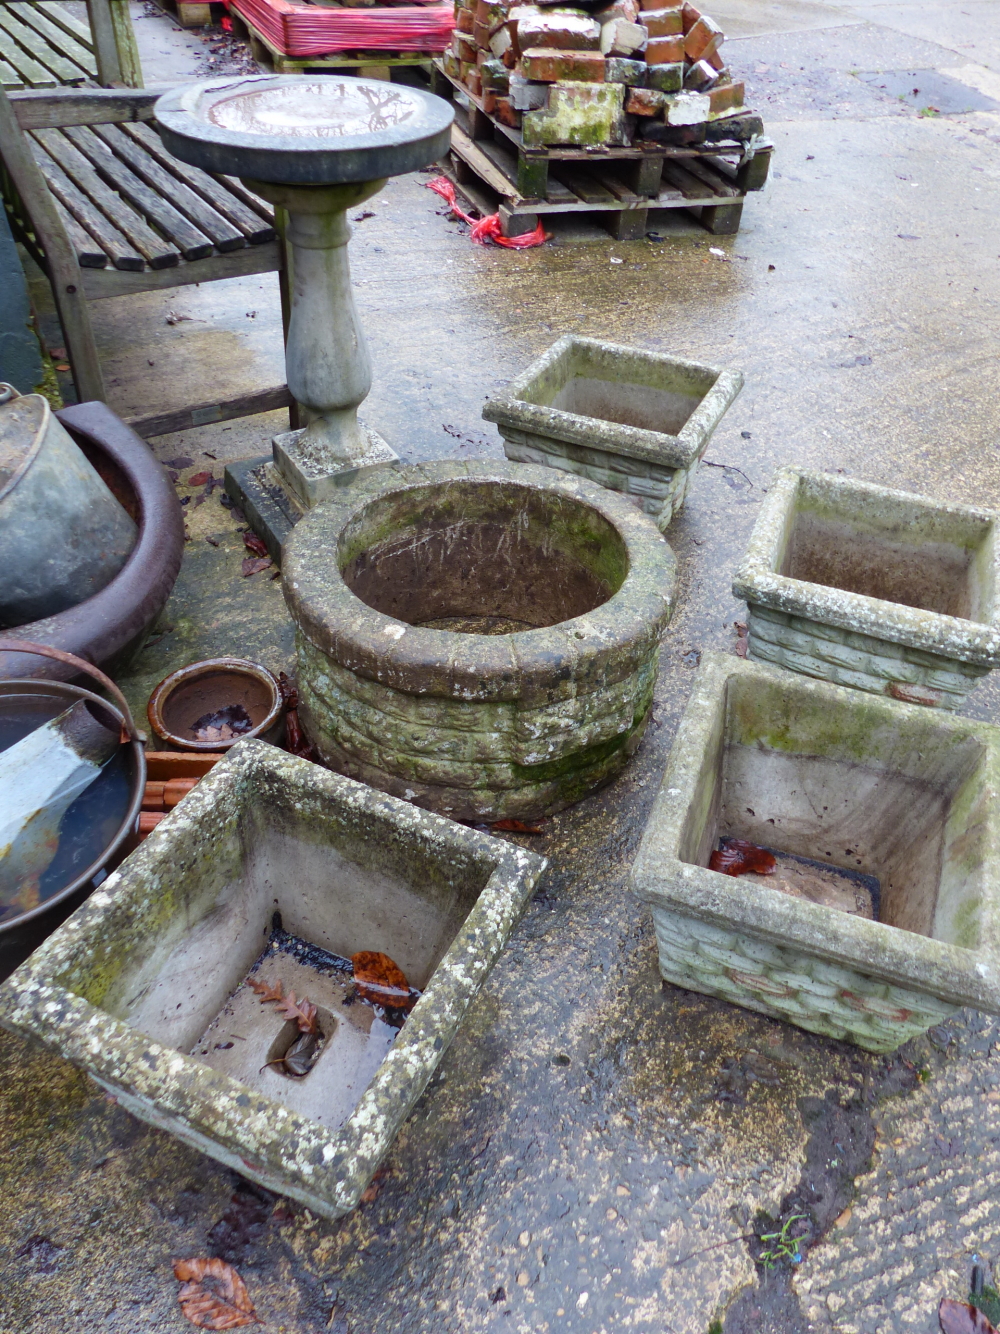 FOUR CONCRETE PLANTERS, A WELL TOP AND BIRD BATH.